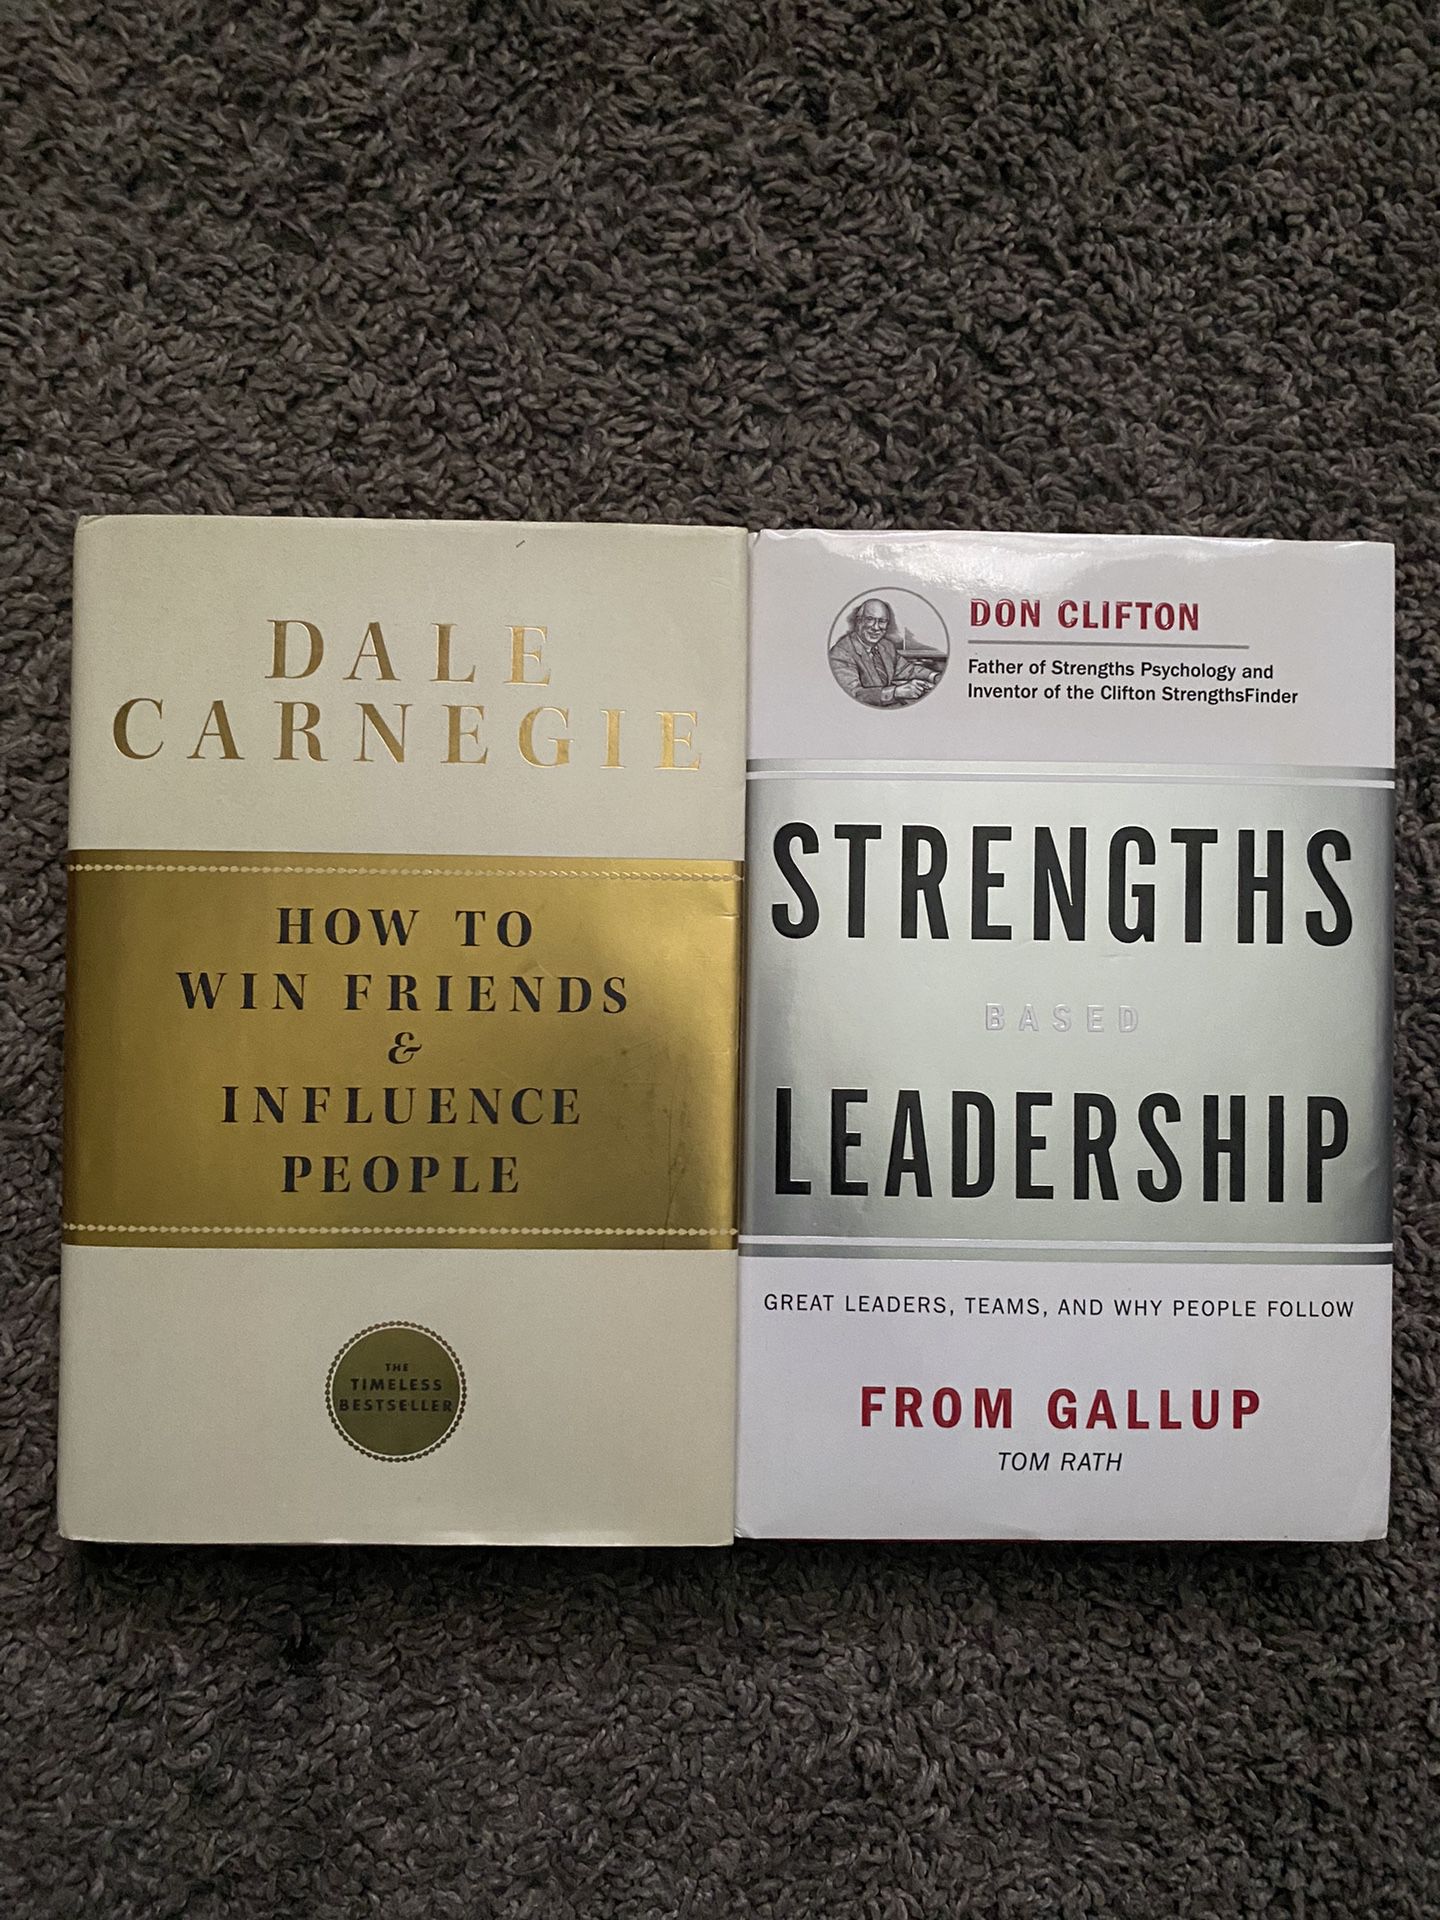 Strengths & Leadership+ “How to Win Friends &Influence “Book Bundle 